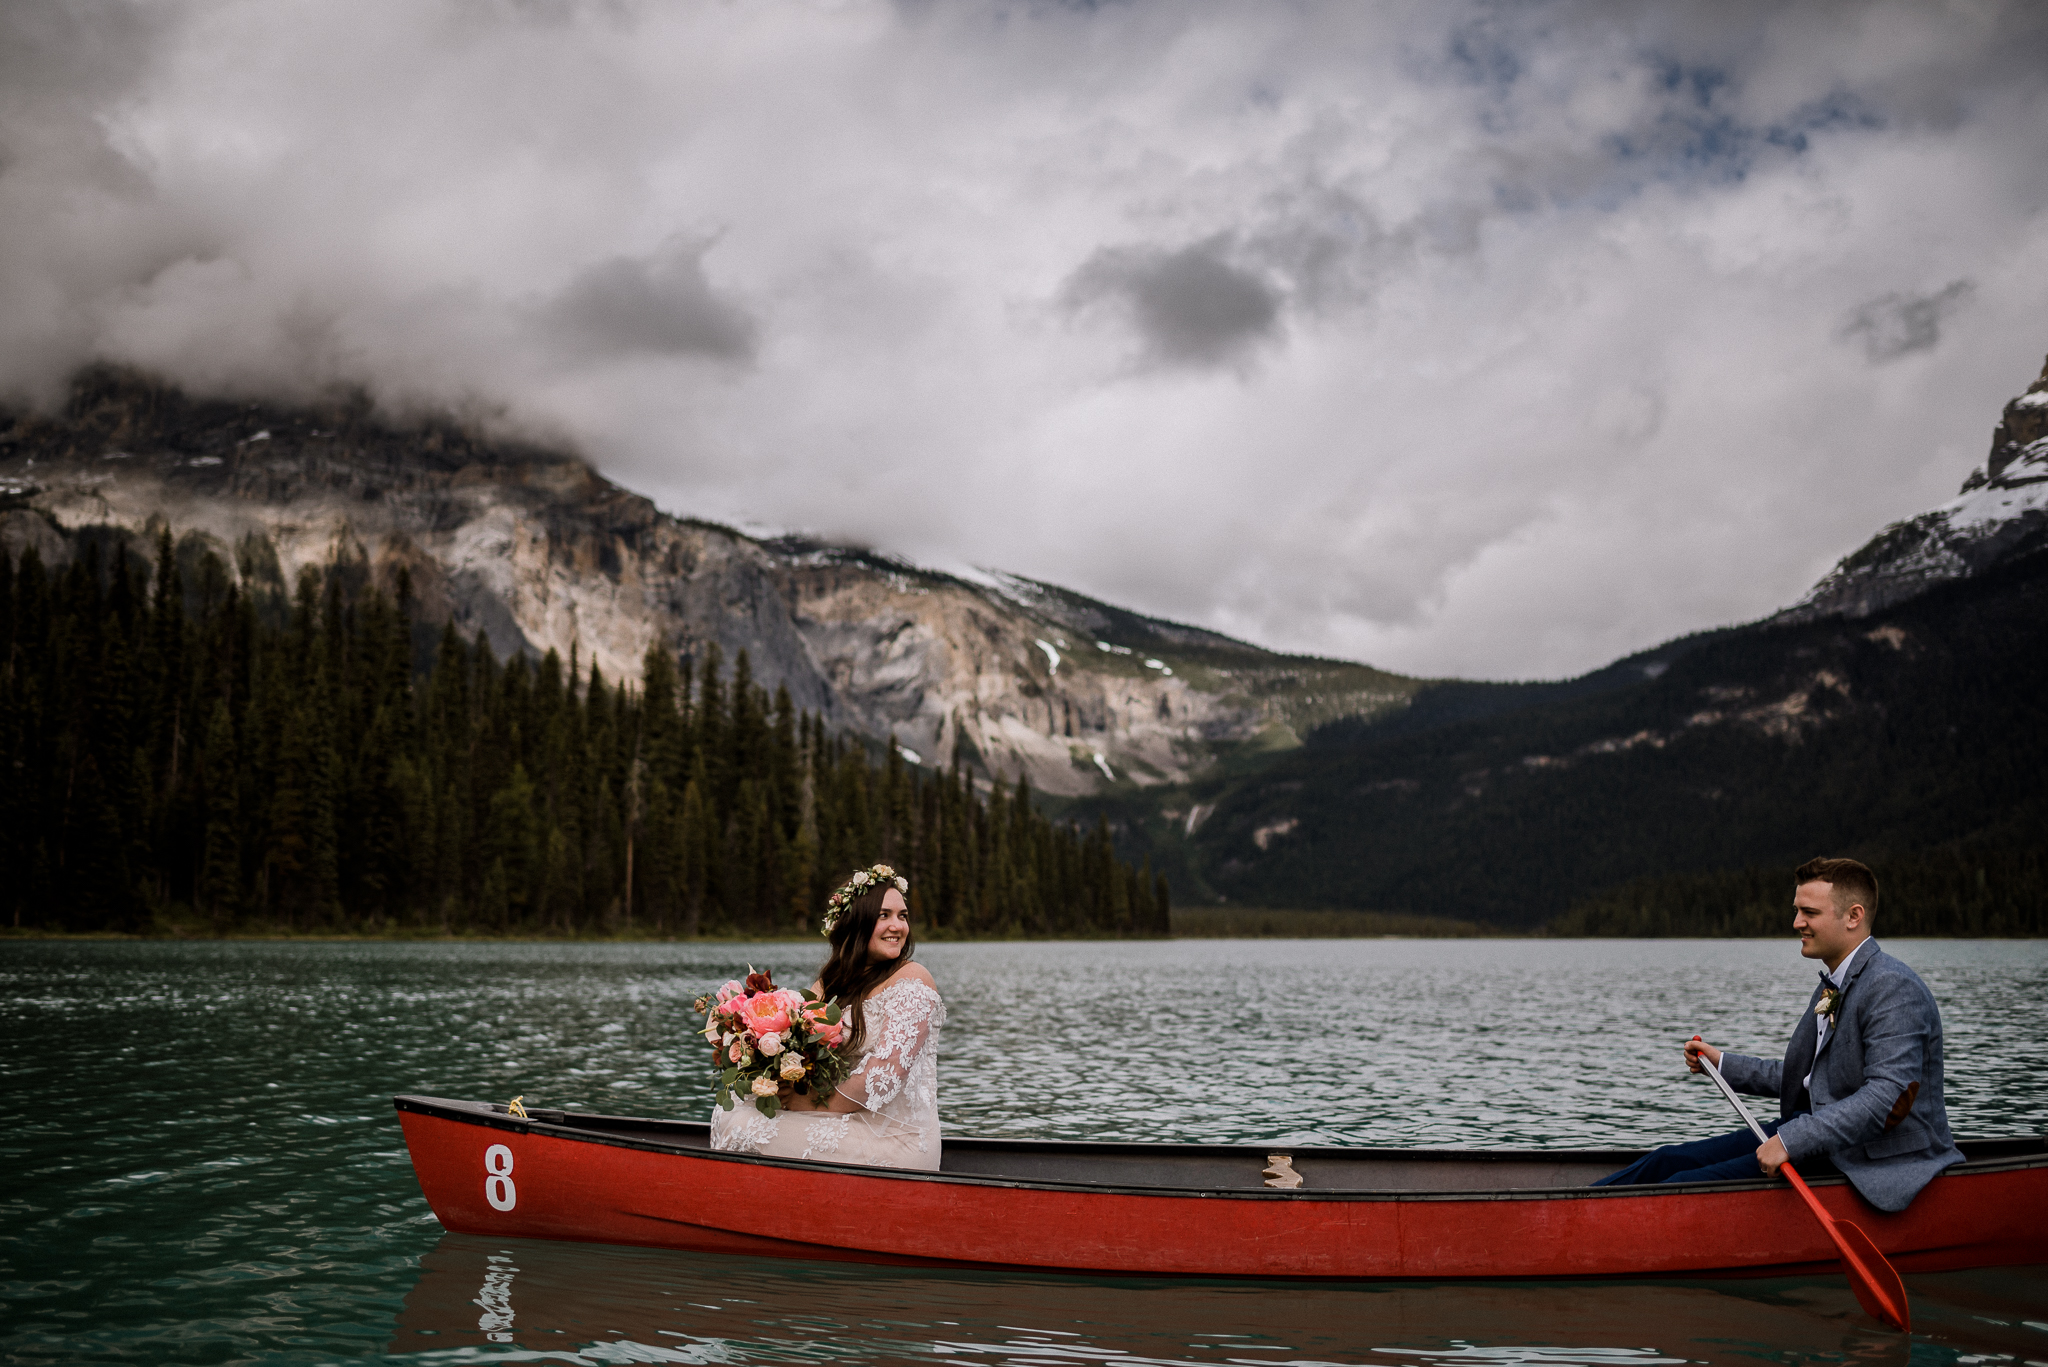 Bride looking back at her groom in a red canoe holding bouquet at Emerald Lake, BC